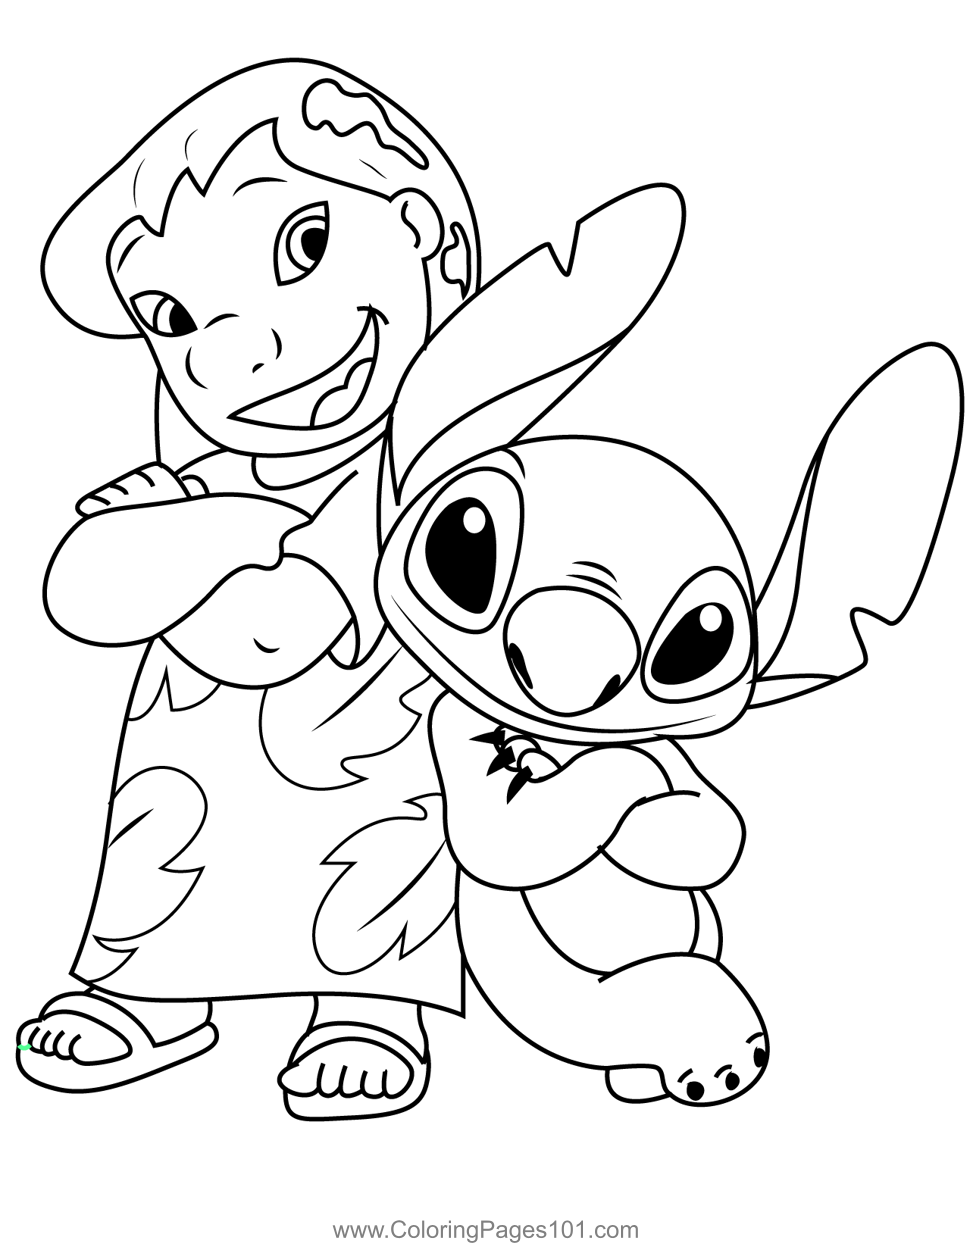 Lilo And Stitch Coloring Pages  Stitch coloring pages, Lilo and